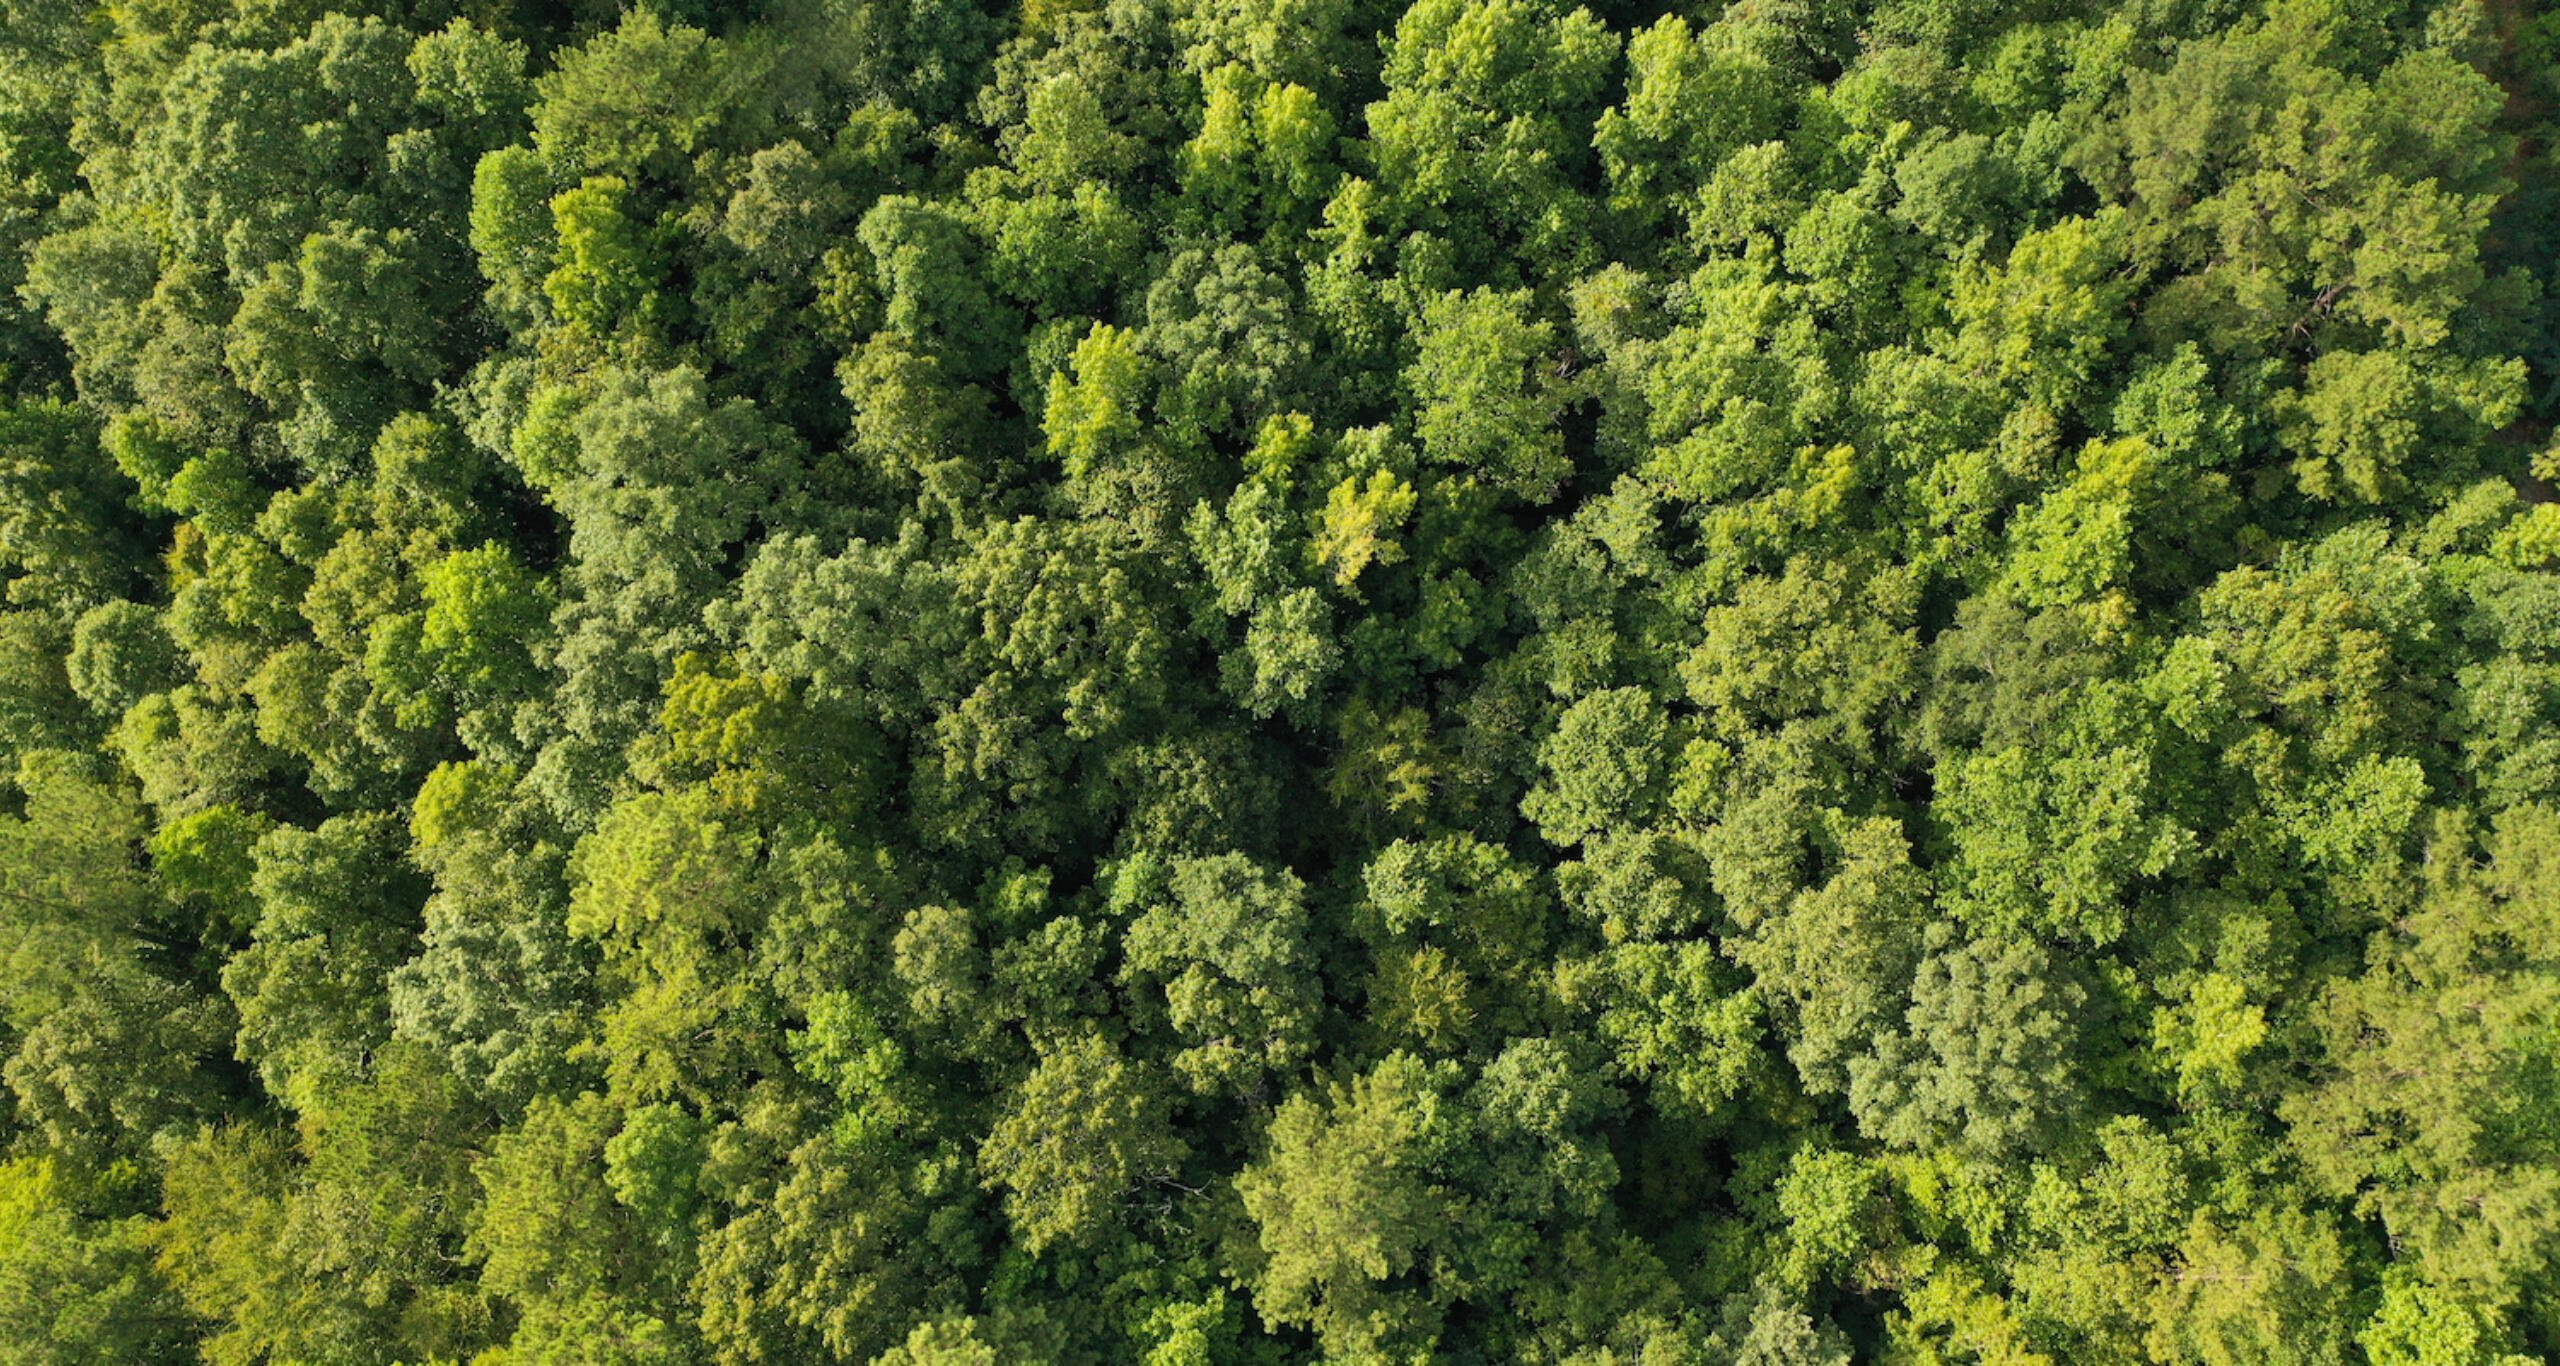 Trees viewed from directly above